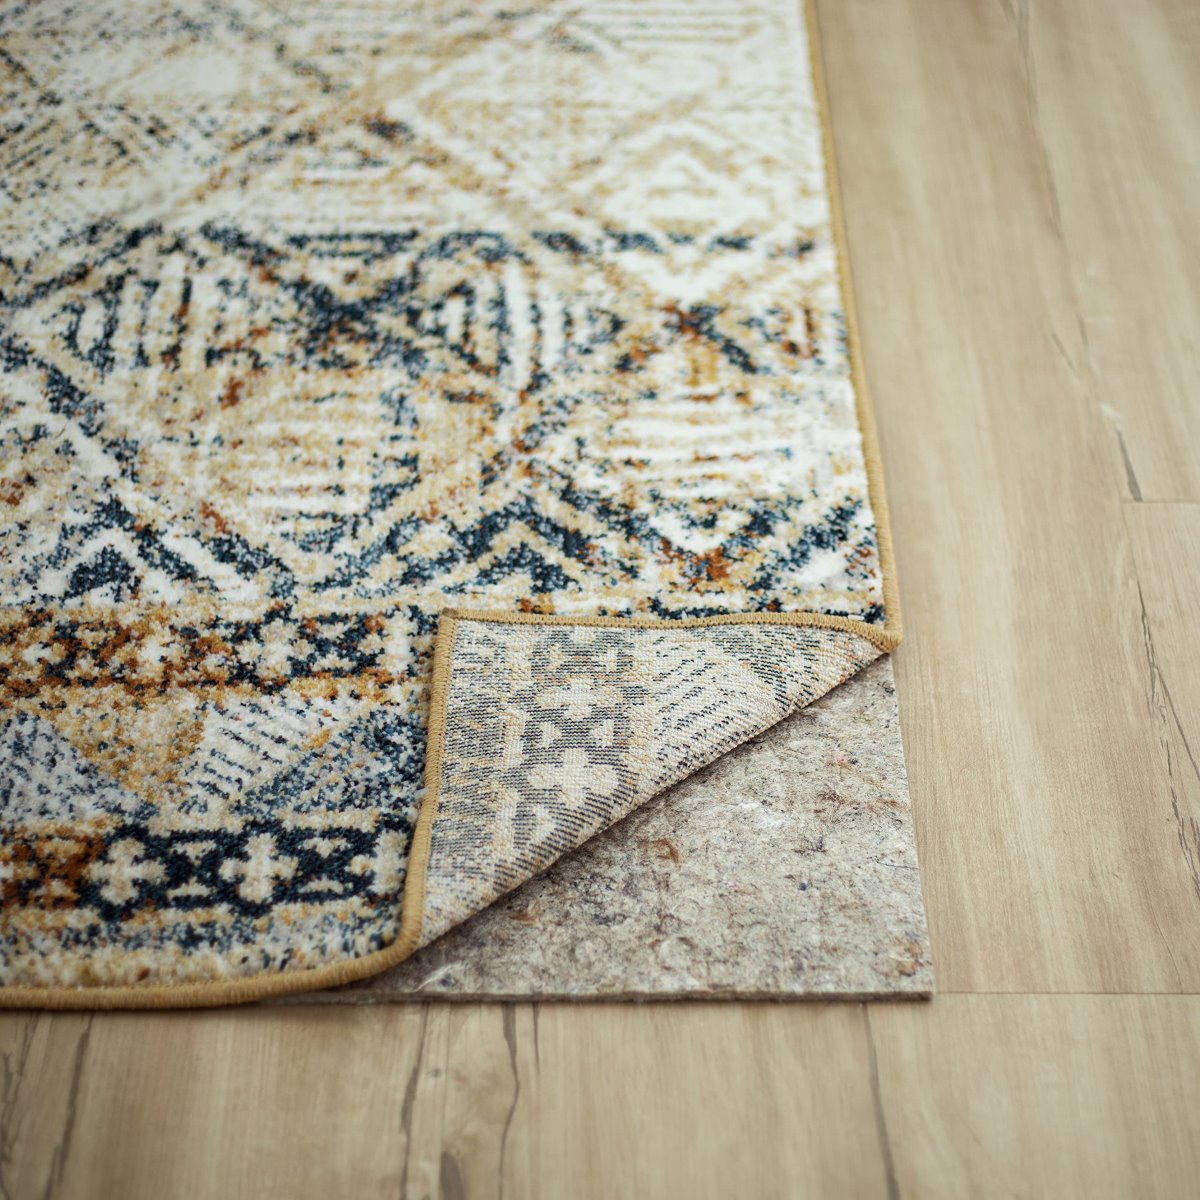 What Kind Of Rugs Are Safe For Luxury Vinyl Plank Flooring